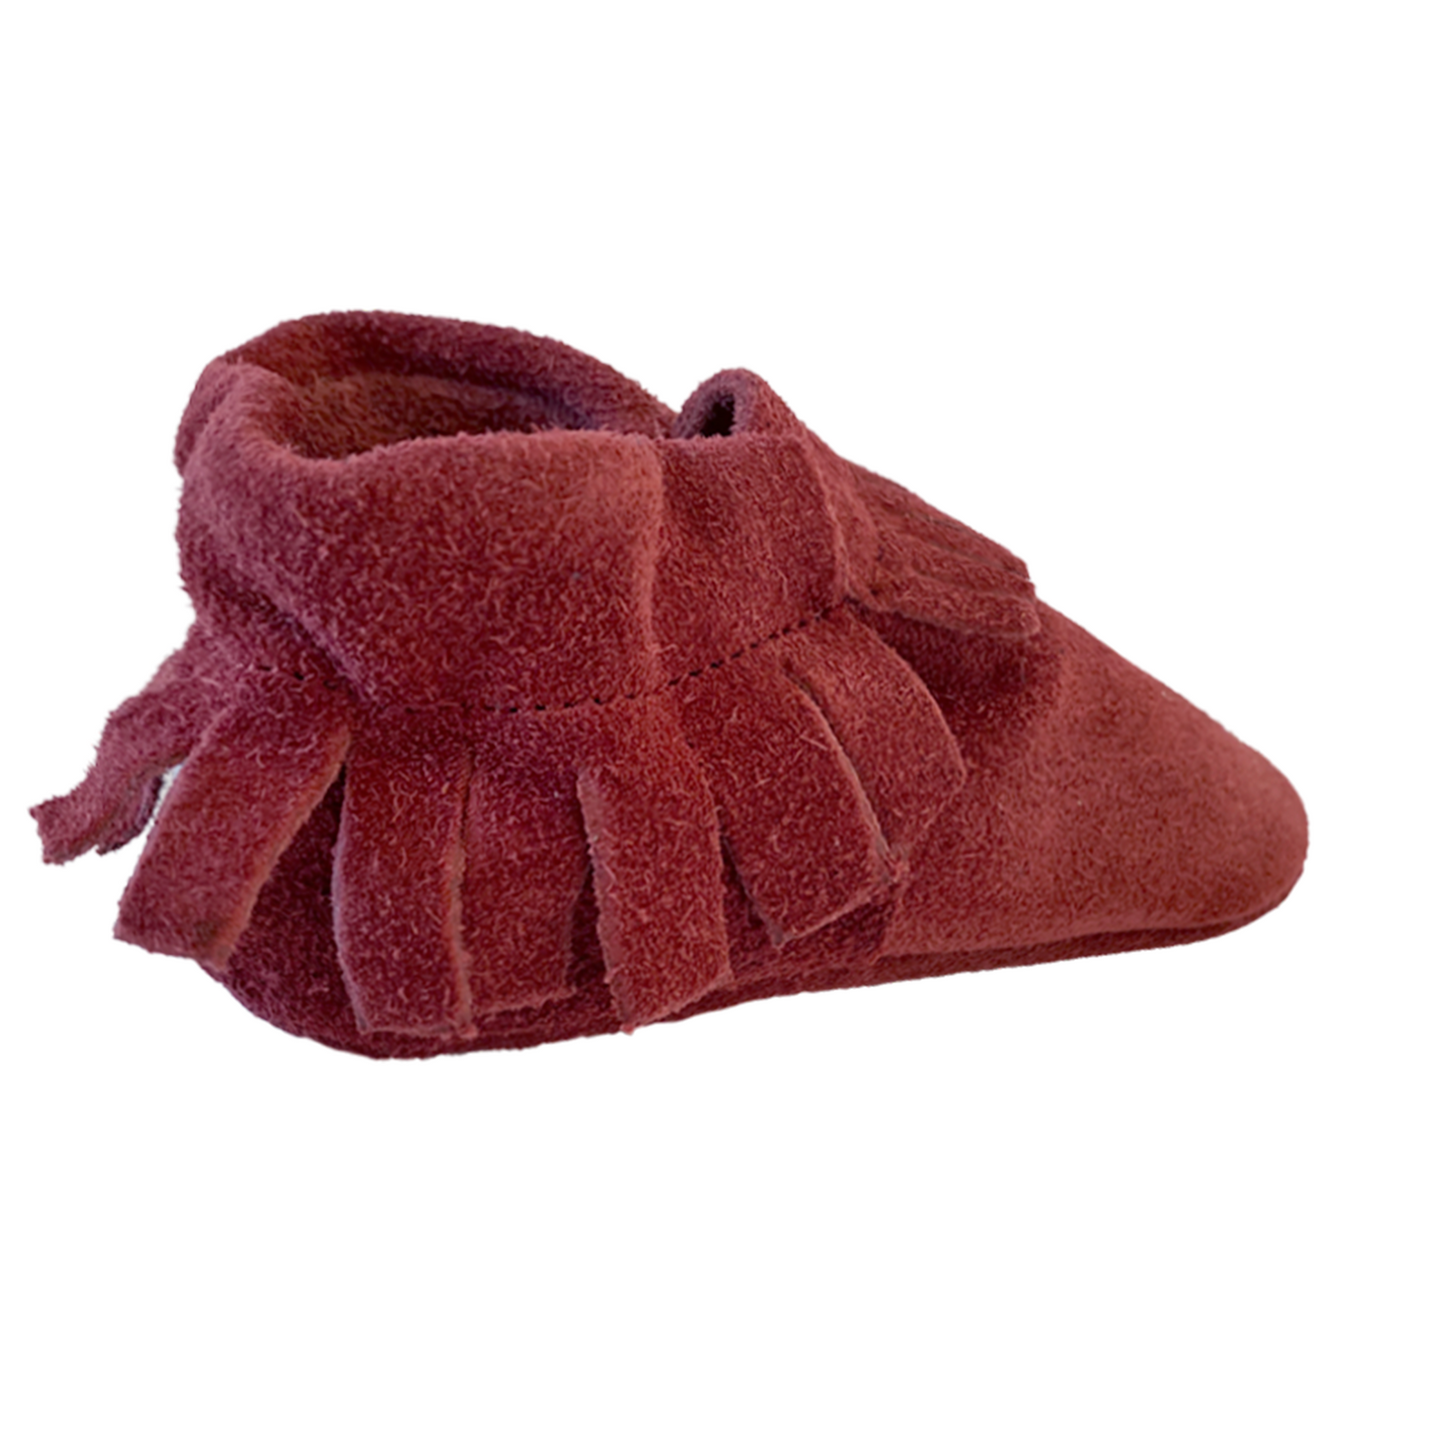 baby moccasins effen maroon suede ibiza style achterkant